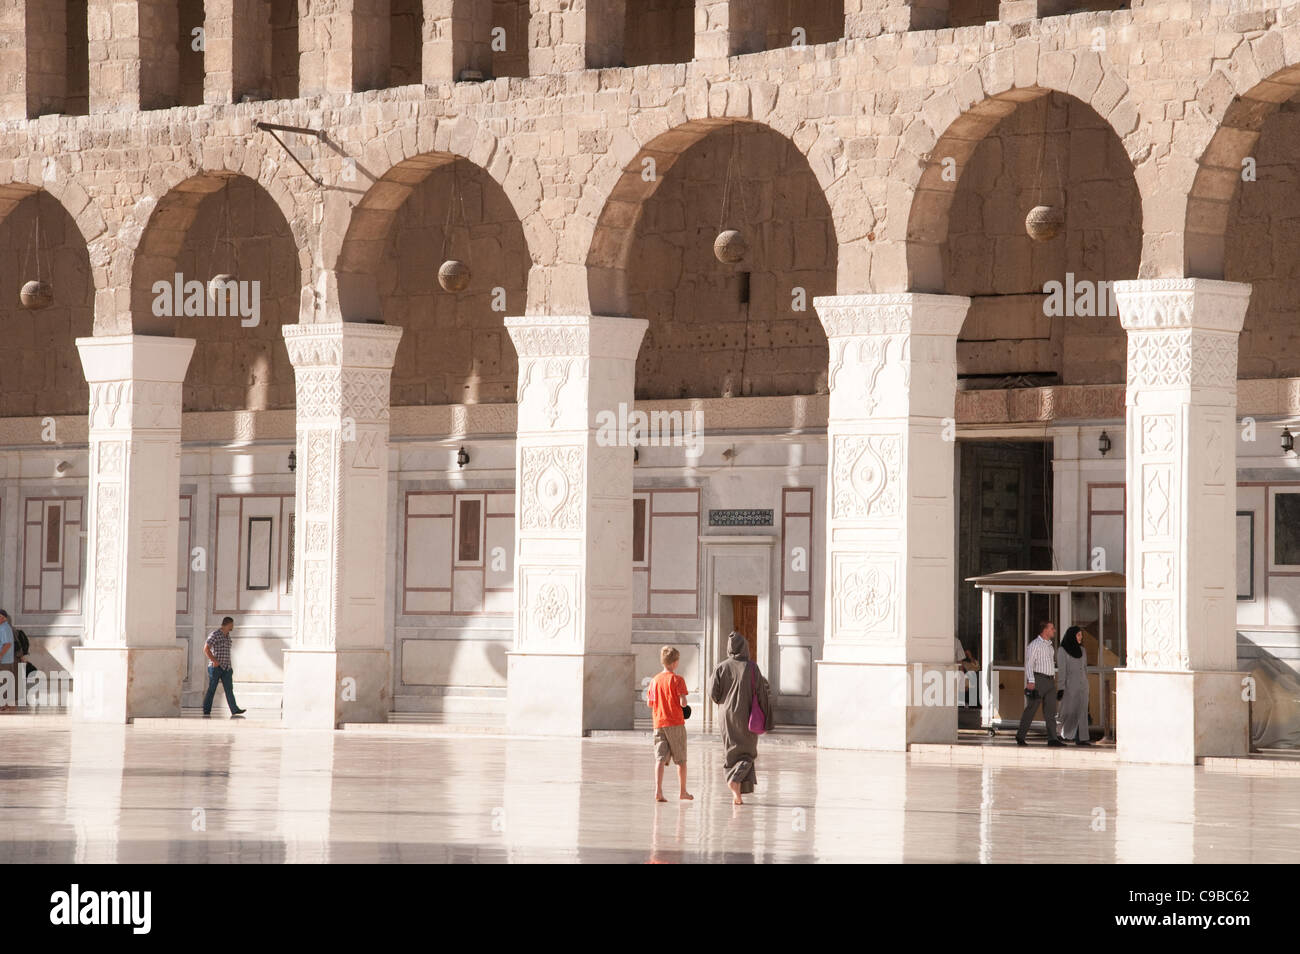 Visitors in the open-air courtyard of the Umayyad Mosque in the old city of Damascus, Syria. Stock Photo